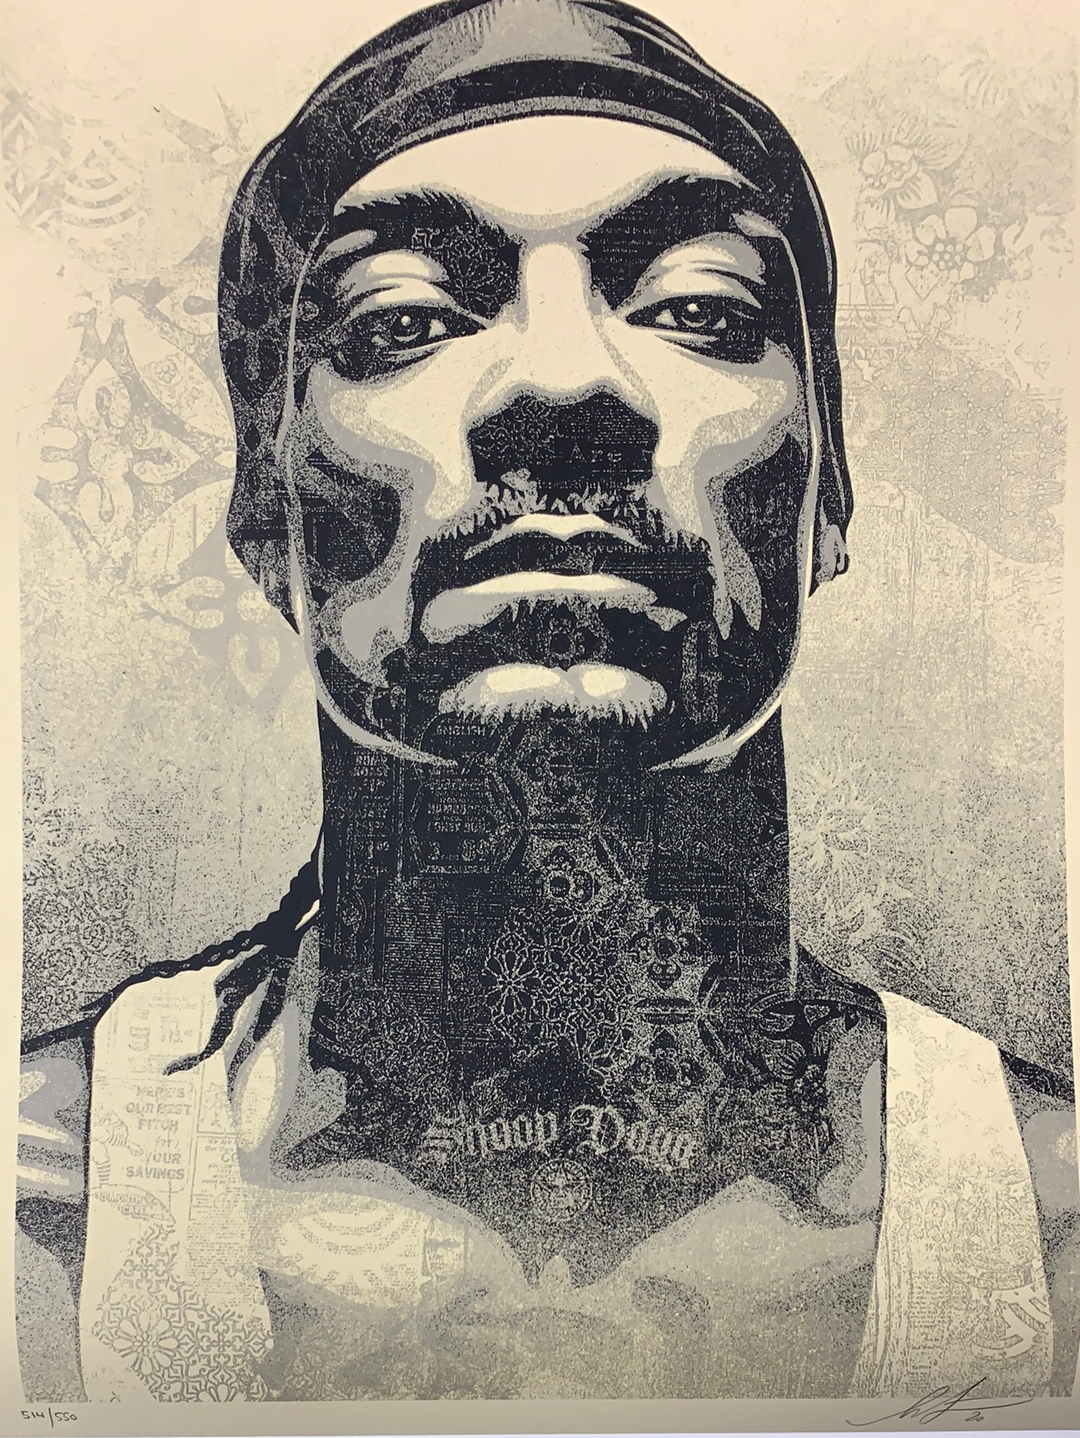 Snoop D O Double G Dogg Shepard Fairey Poster Obey Art Print Sold Out Posters